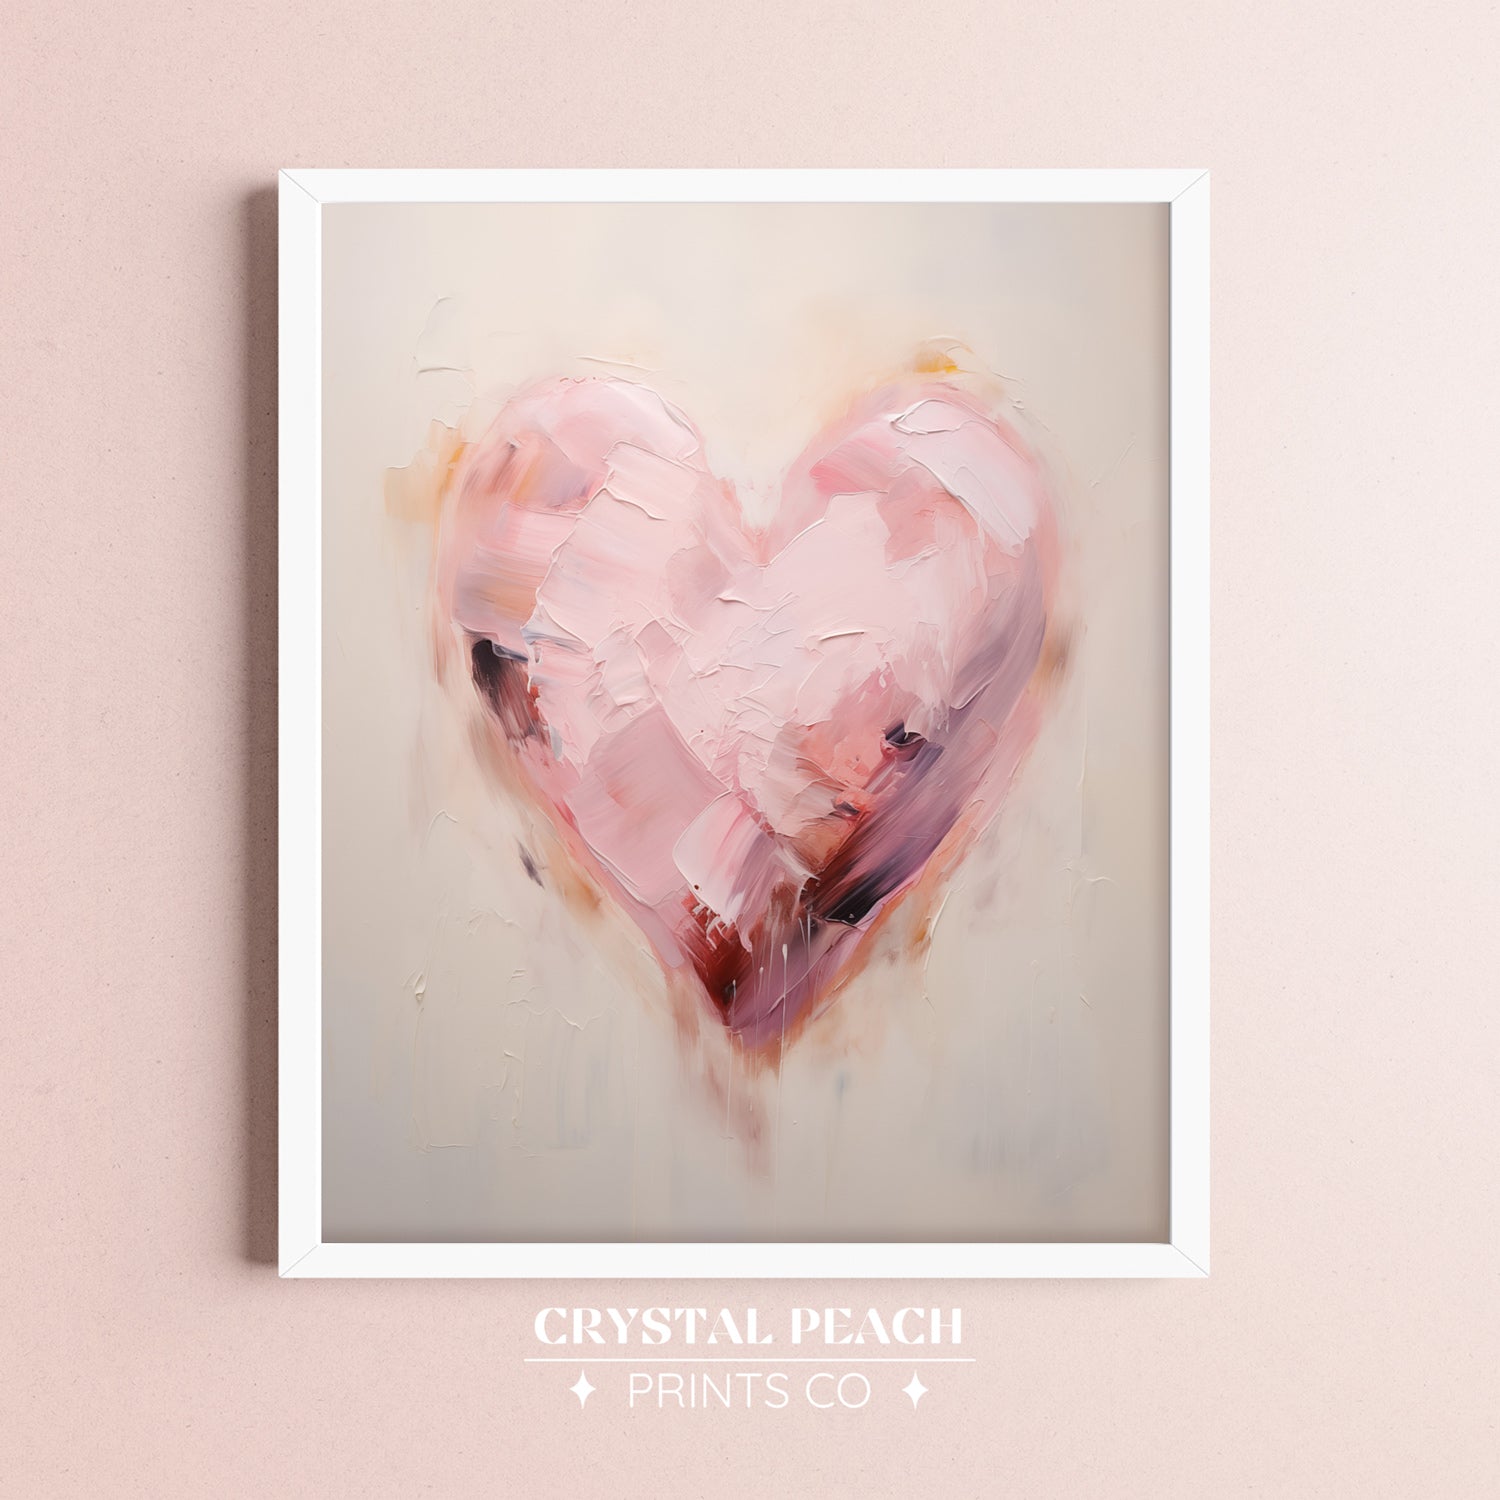 Valentine's Day Pink Heart Print - Pink Coquette Aesthetic Apartment Art Decoration - Rustic Valentine Girly Trendy Wall Art - Gift For HerPink Heart Digital Print - Minimalist Valentine's Day Wall Art - Pink Aesthetic Wall Art - Trendy Preppy Dorm - Valentine Gift for Her